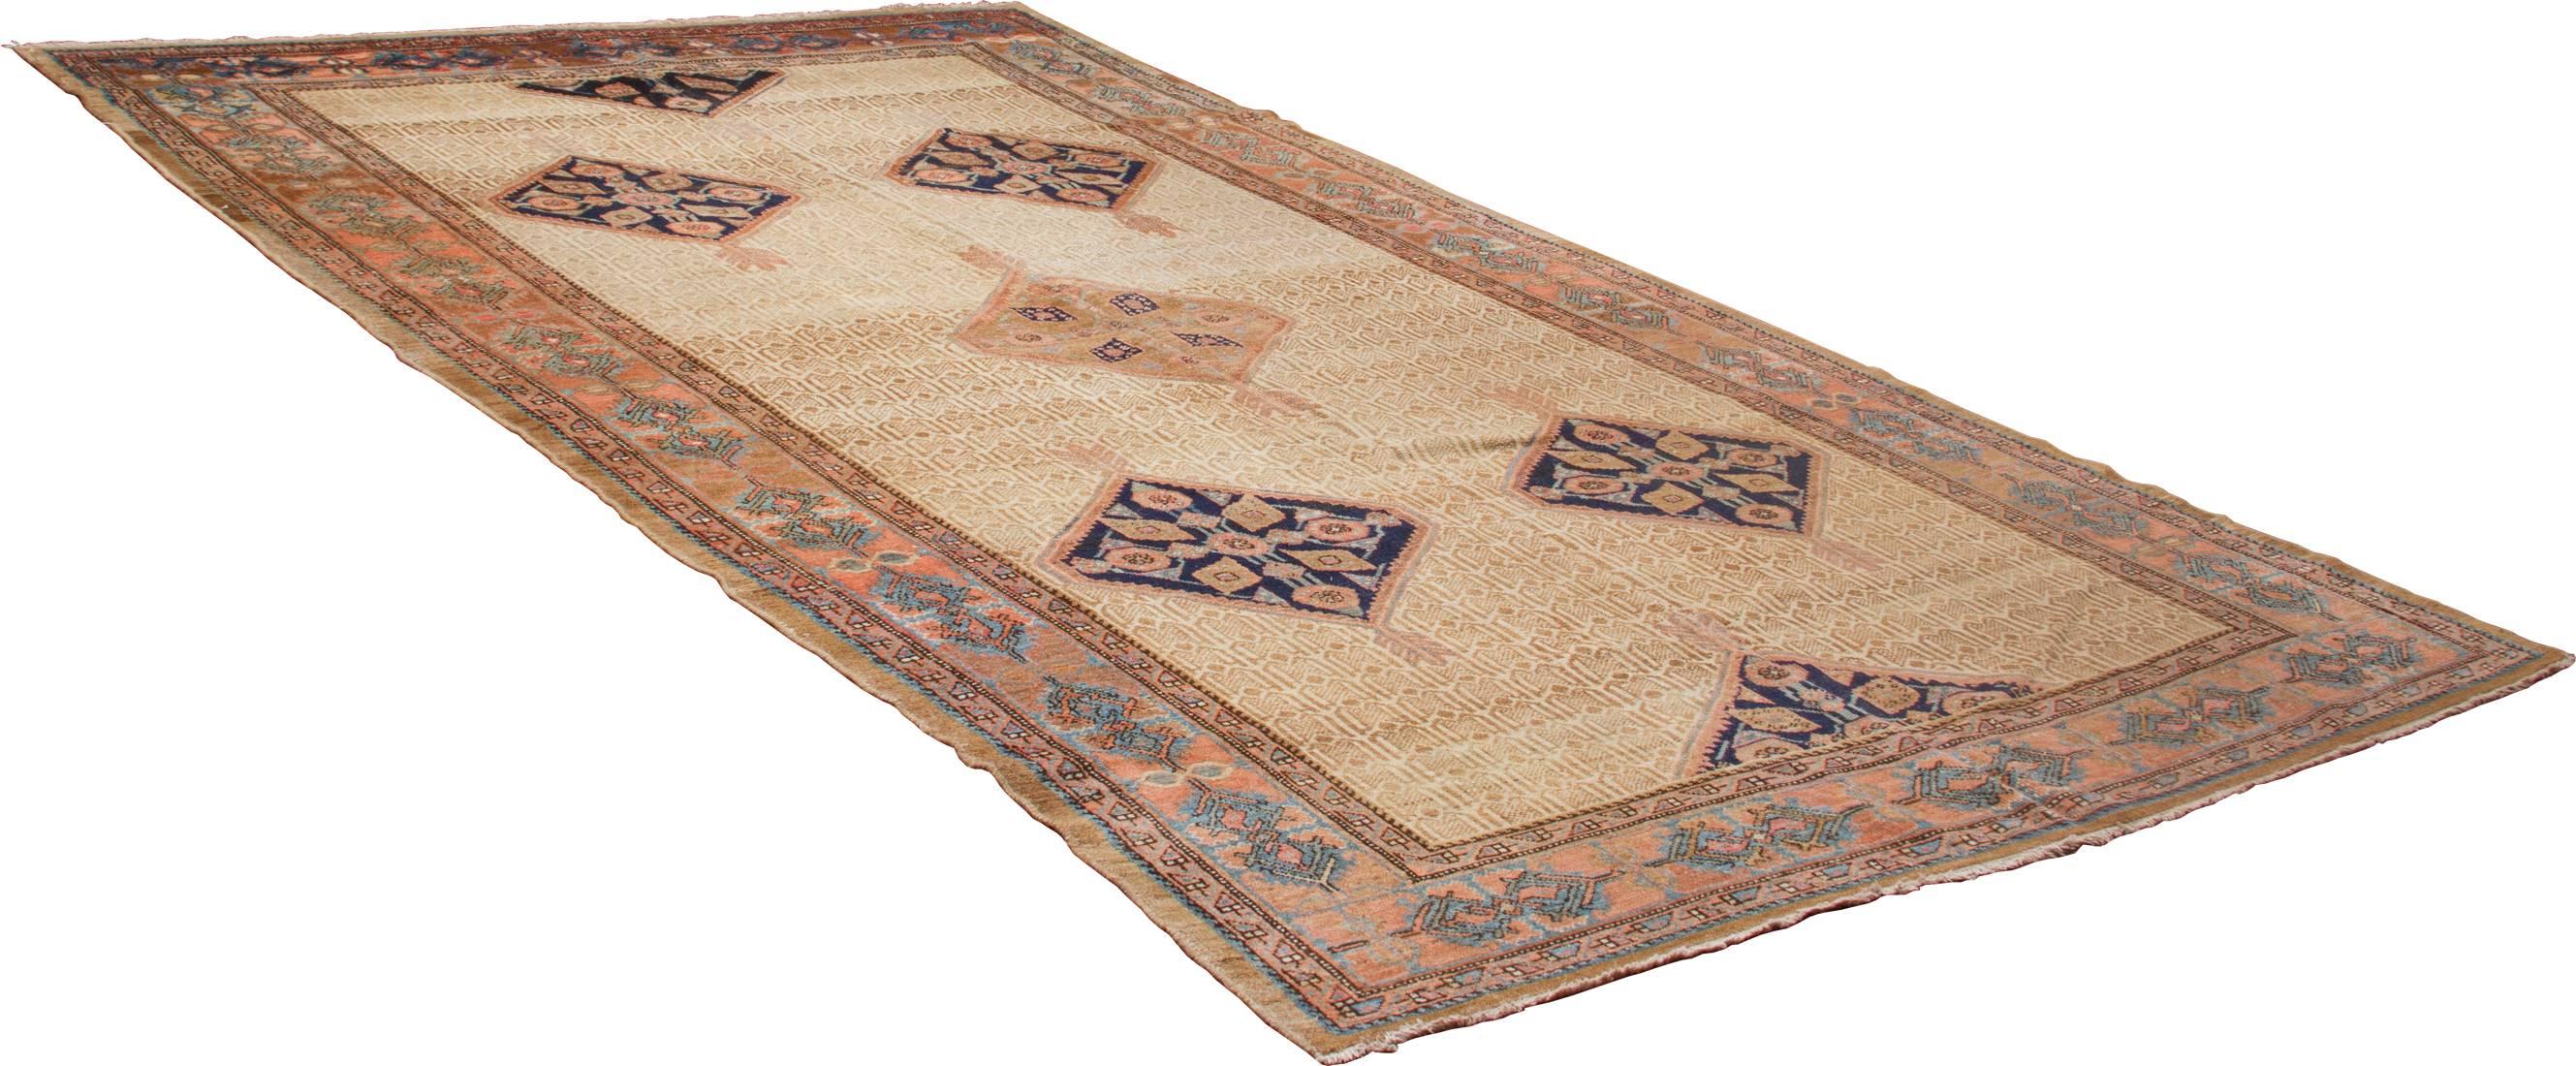 This is a beautiful Serab Rug.  Hand crafted in the East Azerbaijan Province of Iran, this rug is fashioned from natural Camel Hair.  Camel hair rugs are some of the rarest rugs to be found in vintage rugs.  This rug was crafted Circa 1910. 

Camel